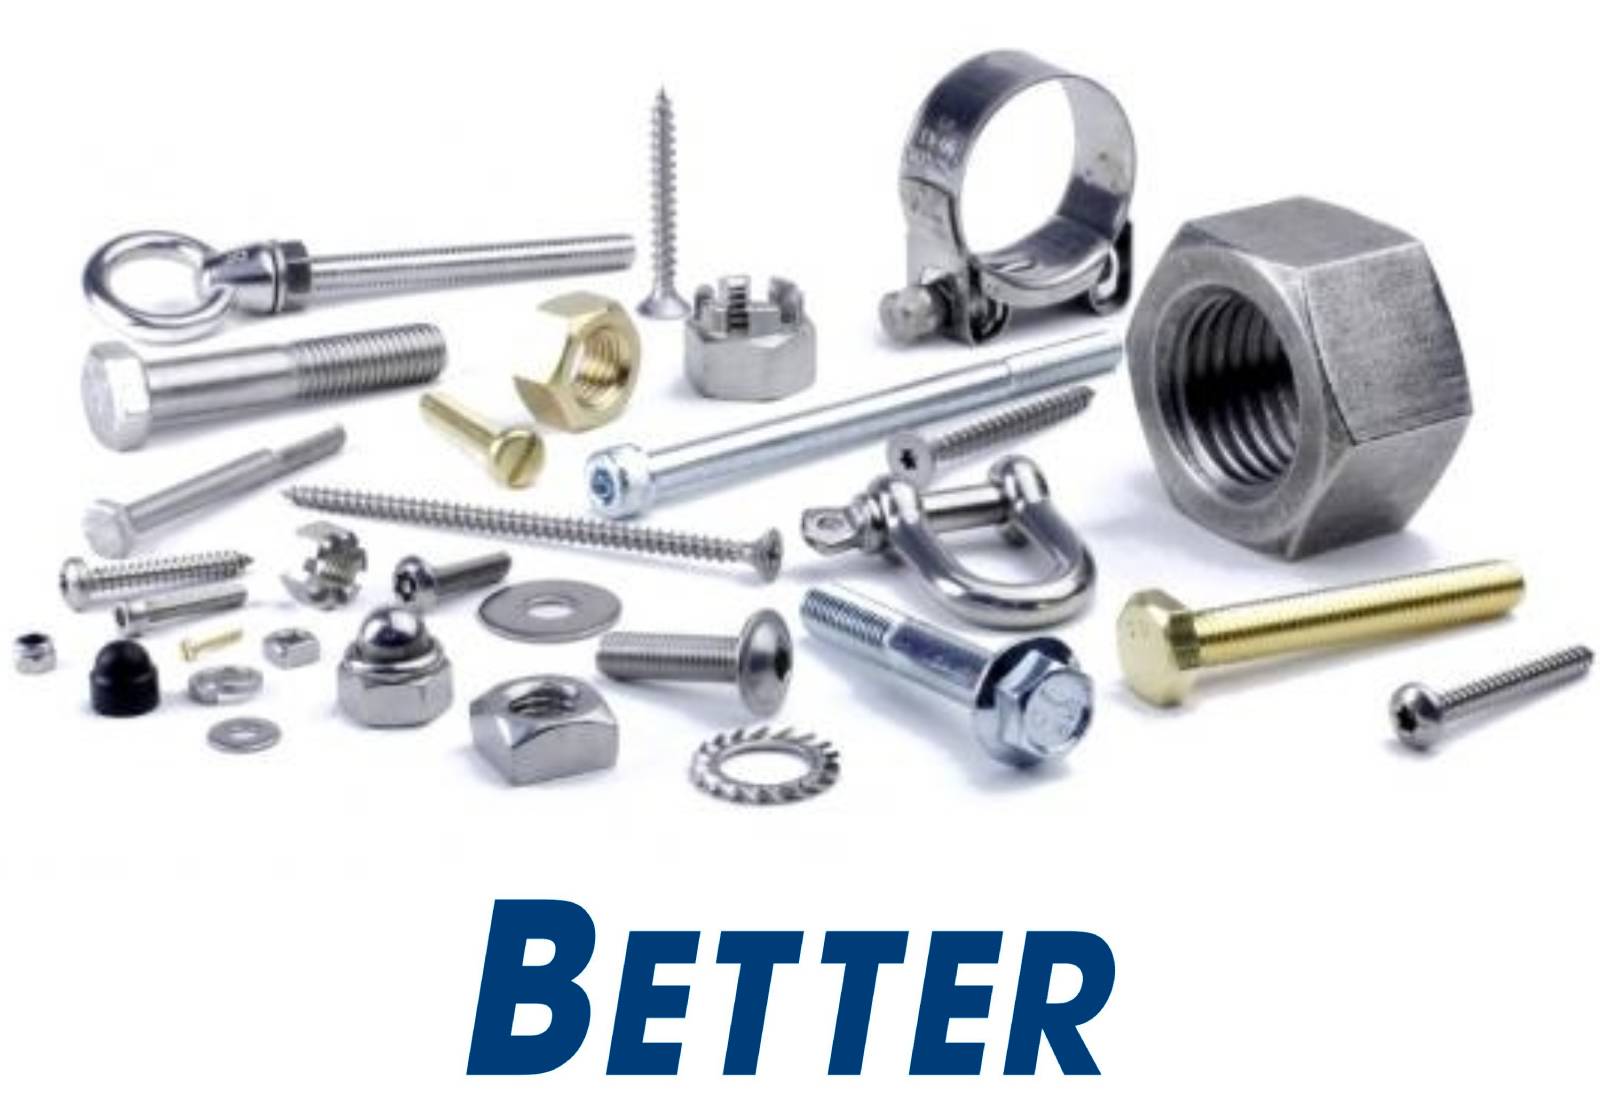 Nuts/Bolts/Screws & Fasteners Business For Sale